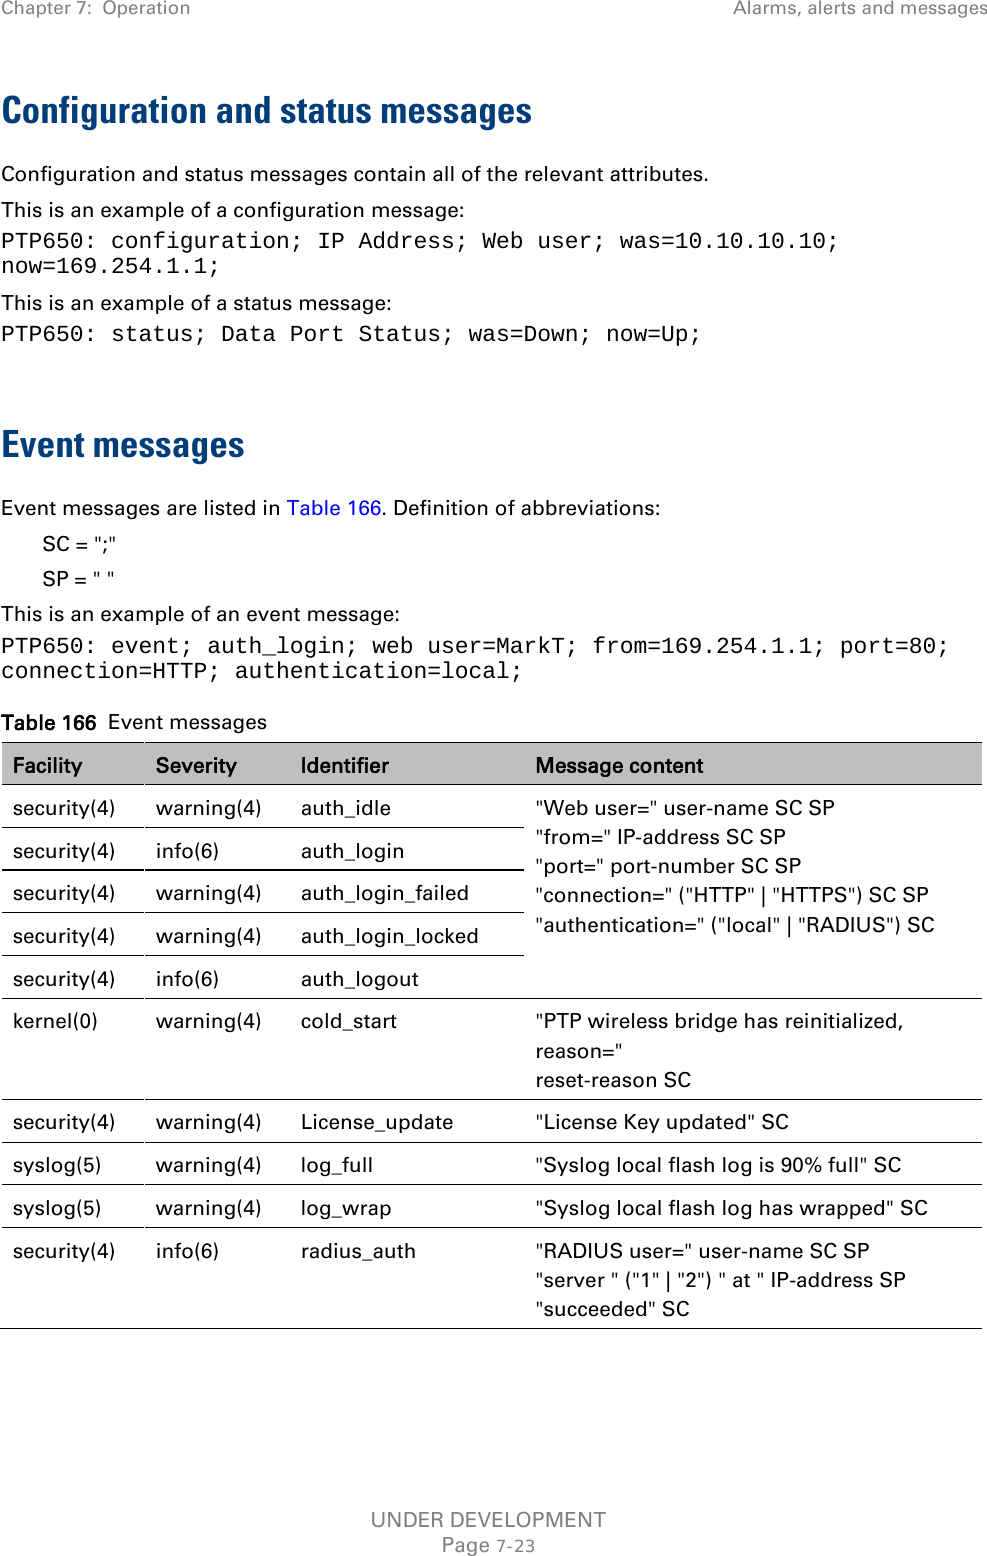 Chapter 7:  Operation Alarms, alerts and messages  Configuration and status messages Configuration and status messages contain all of the relevant attributes. This is an example of a configuration message: PTP650: configuration; IP Address; Web user; was=10.10.10.10; now=169.254.1.1; This is an example of a status message: PTP650: status; Data Port Status; was=Down; now=Up;  Event messages Event messages are listed in Table 166. Definition of abbreviations: SC = &quot;;&quot; SP = &quot; &quot; This is an example of an event message: PTP650: event; auth_login; web user=MarkT; from=169.254.1.1; port=80;  connection=HTTP; authentication=local; Table 166  Event messages Facility Severity Identifier Message content security(4) warning(4) auth_idle &quot;Web user=&quot; user-name SC SP  &quot;from=&quot; IP-address SC SP  &quot;port=&quot; port-number SC SP  &quot;connection=&quot; (&quot;HTTP&quot; | &quot;HTTPS&quot;) SC SP &quot;authentication=&quot; (&quot;local&quot; | &quot;RADIUS&quot;) SC security(4) info(6) auth_login security(4) warning(4) auth_login_failed security(4) warning(4) auth_login_locked security(4) info(6) auth_logout kernel(0) warning(4) cold_start &quot;PTP wireless bridge has reinitialized, reason=&quot;  reset-reason SC security(4) warning(4) License_update &quot;License Key updated&quot; SC syslog(5) warning(4) log_full &quot;Syslog local flash log is 90% full&quot; SC syslog(5) warning(4) log_wrap &quot;Syslog local flash log has wrapped&quot; SC security(4) info(6) radius_auth &quot;RADIUS user=&quot; user-name SC SP  &quot;server &quot; (&quot;1&quot; | &quot;2&quot;) &quot; at &quot; IP-address SP &quot;succeeded&quot; SC UNDER DEVELOPMENT Page 7-23 